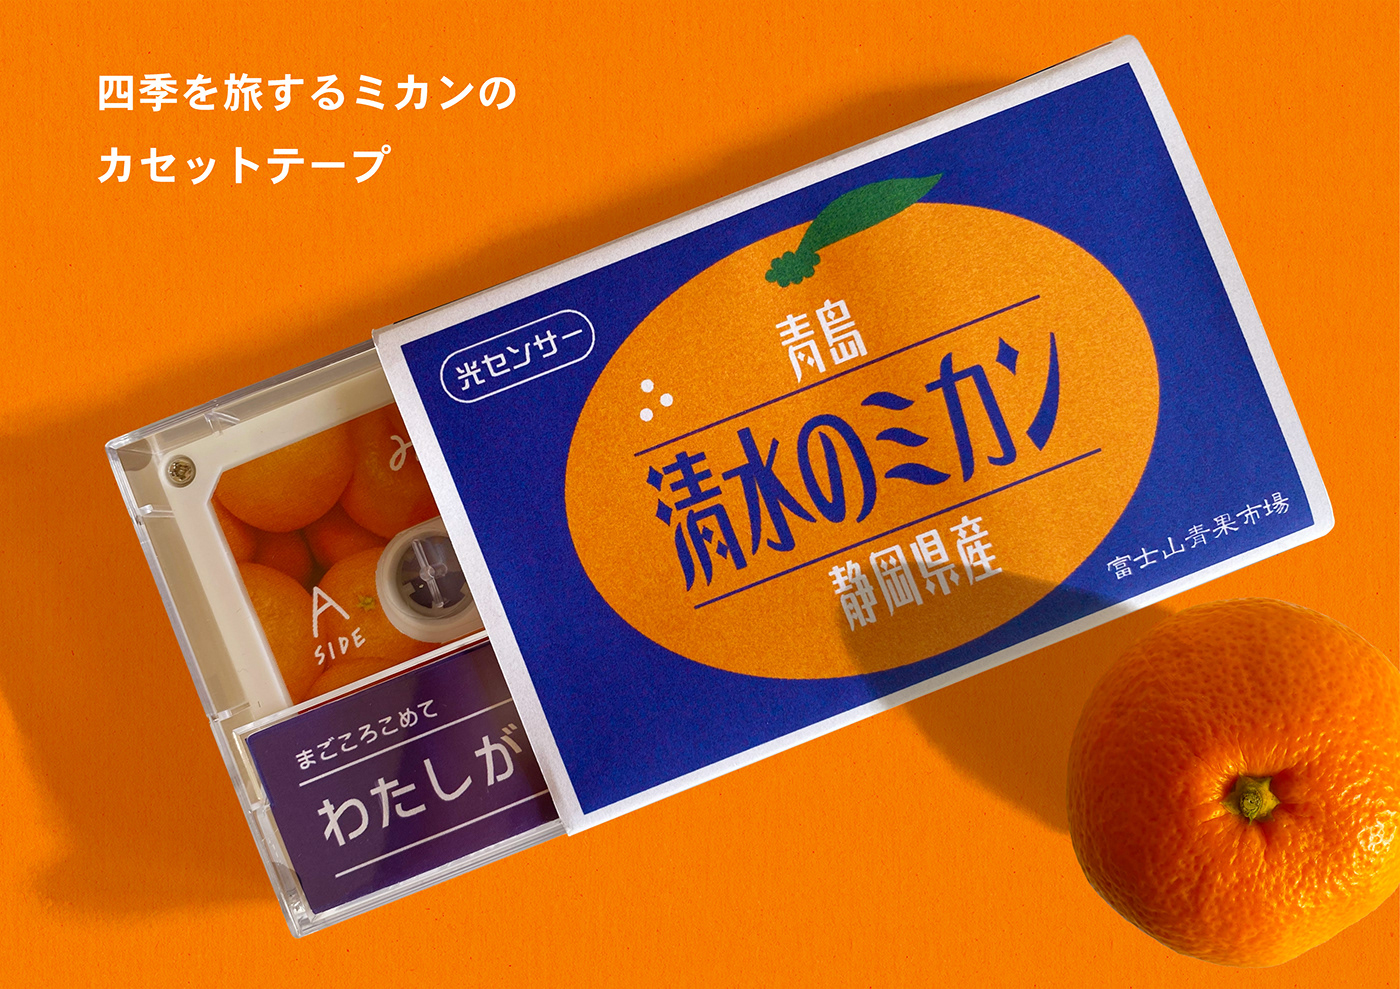 cassette farm Food  Fruit japan package Packaging graphic graphic design  バンタンデザイン学部2020年生